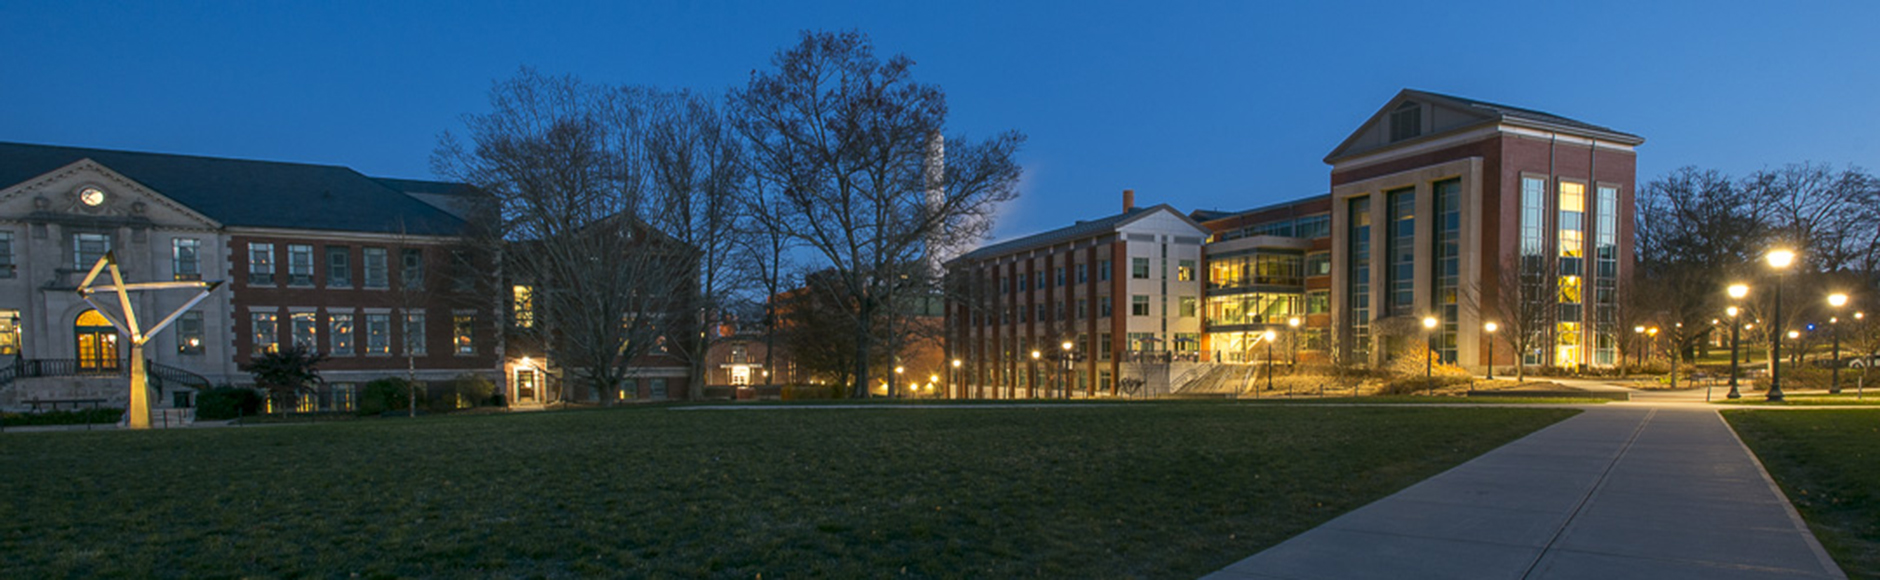 A view of the Gentry Building at night.